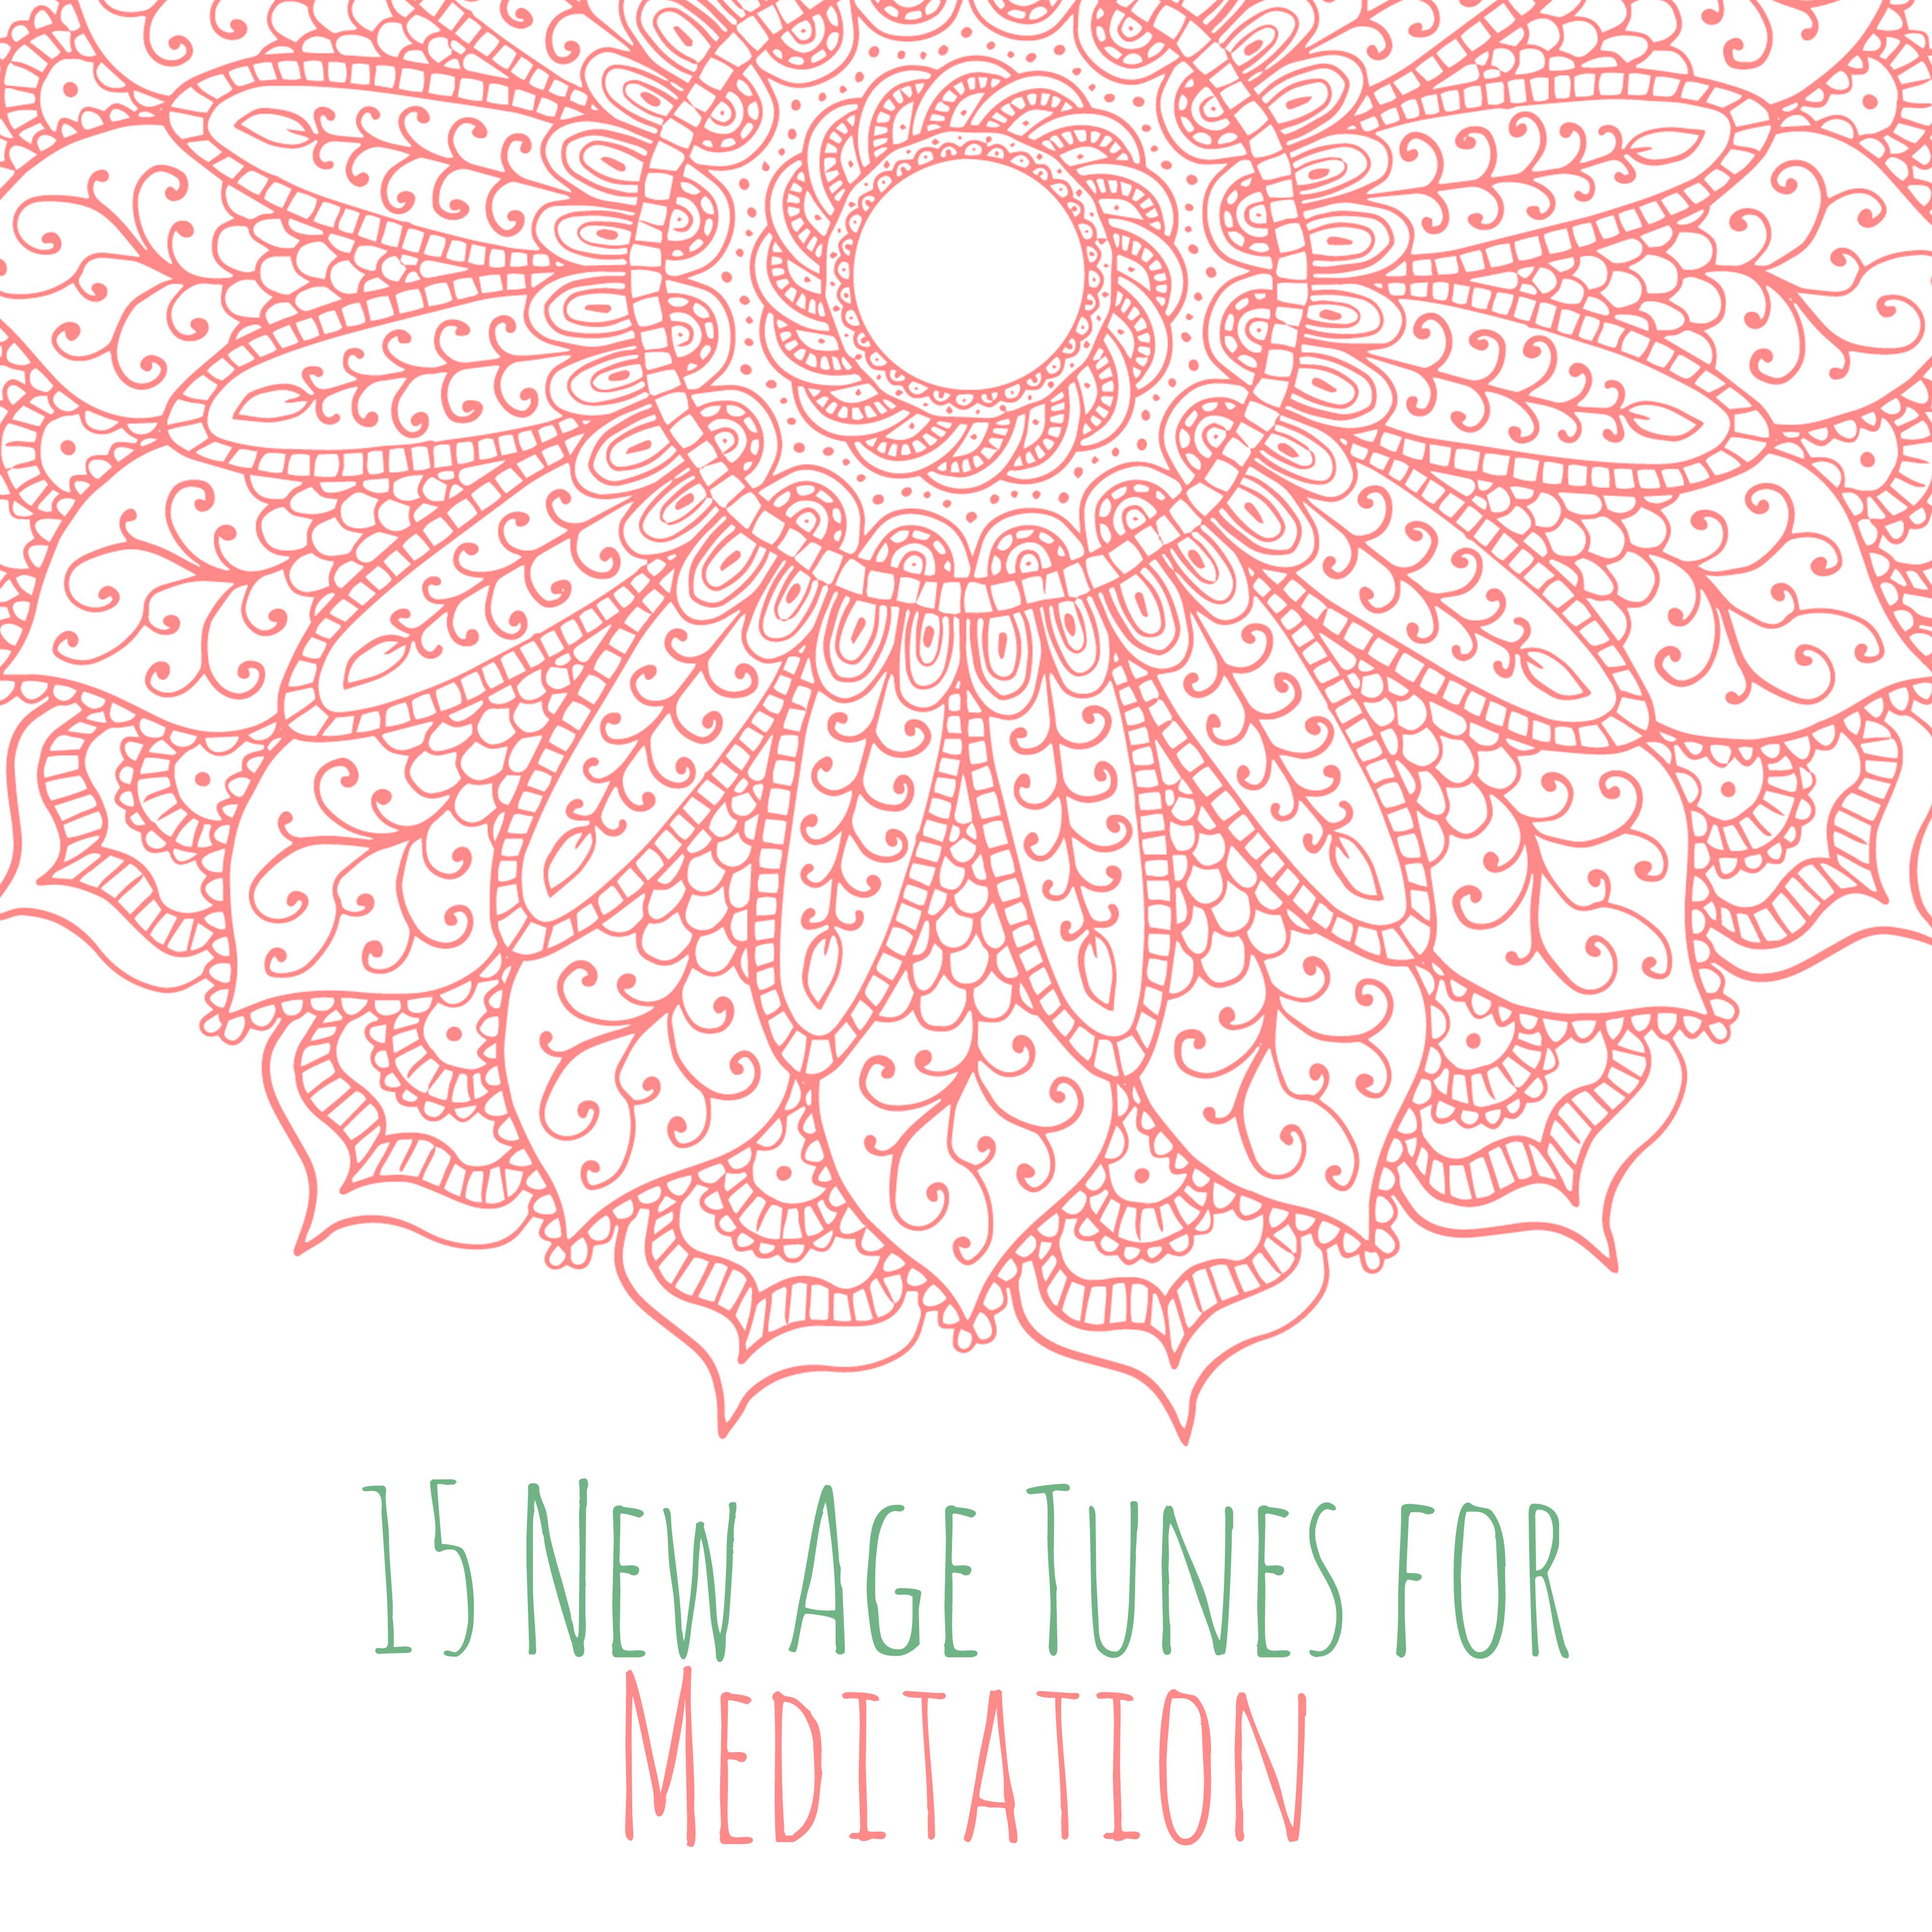 15 New Age Tunes for Meditation